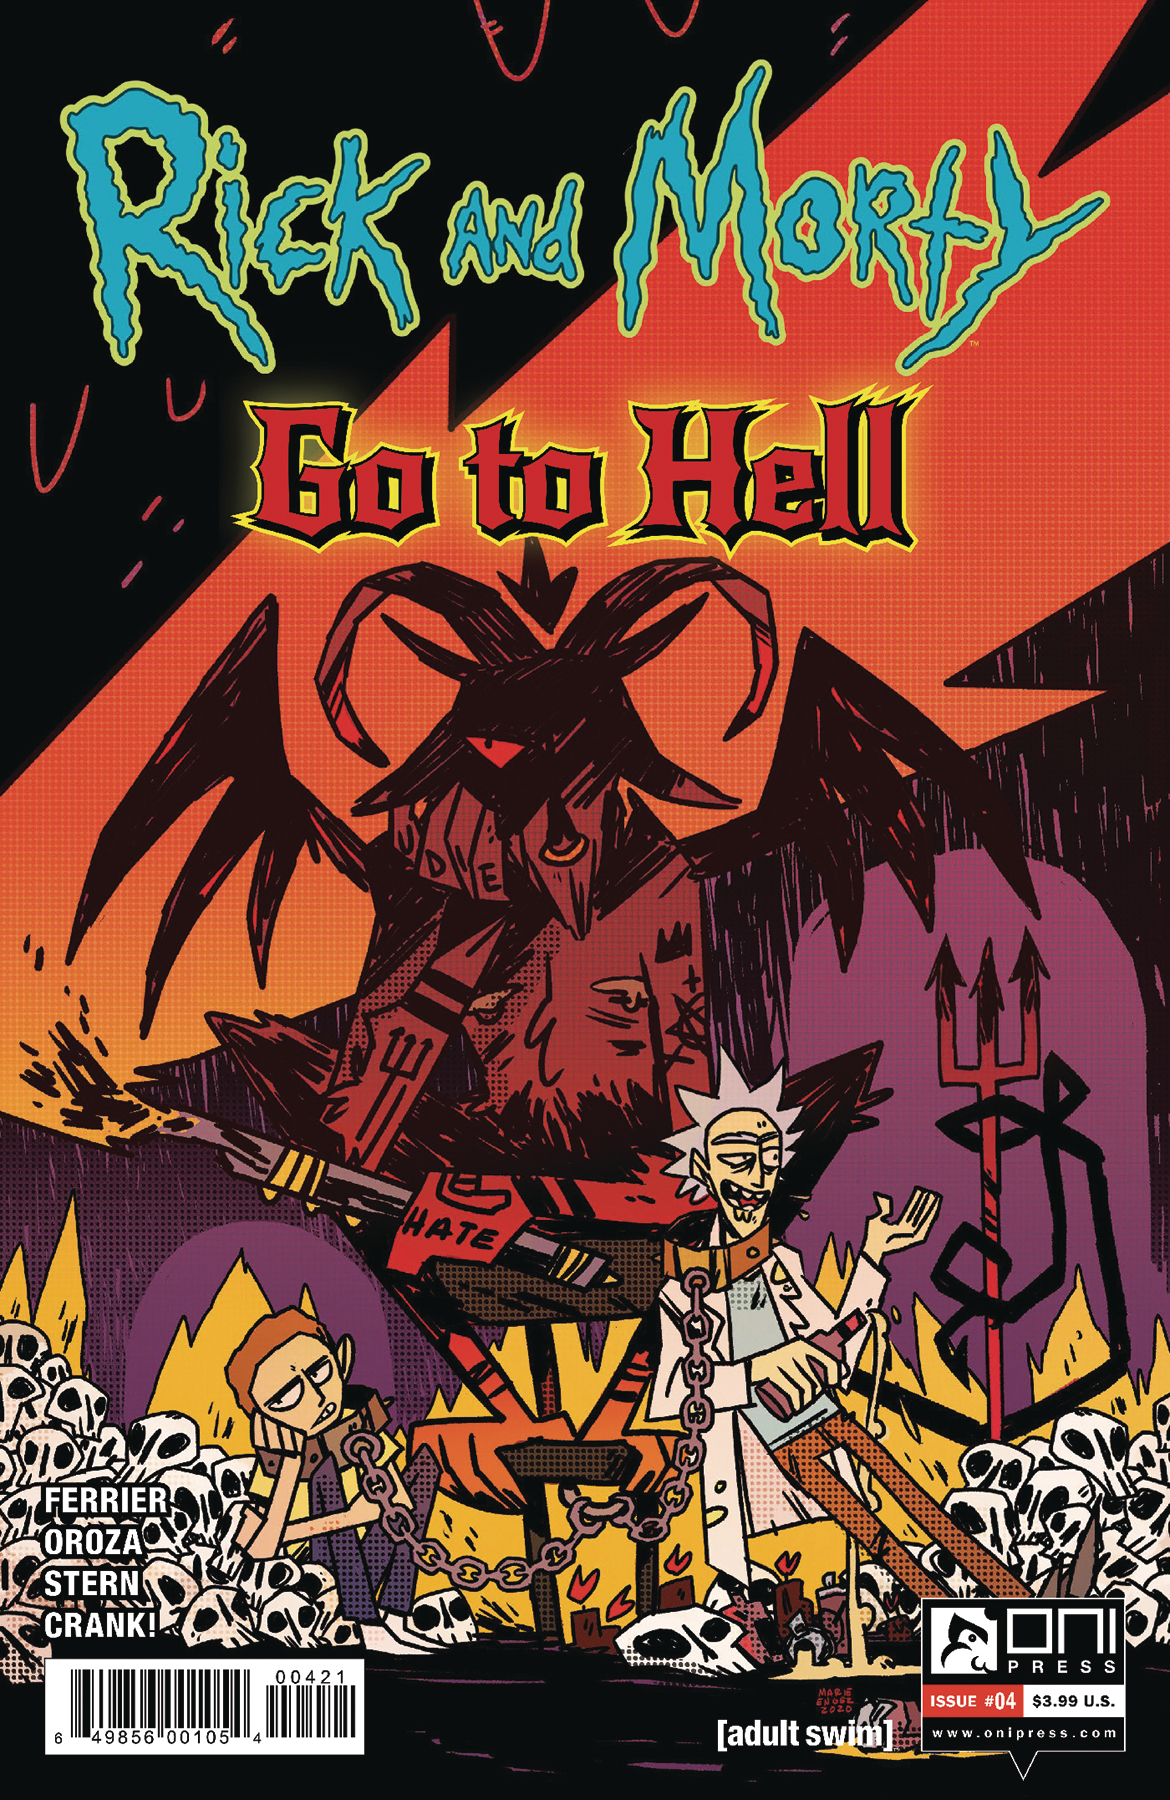 RICK AND MORTY GO TO HELL #4 CVR B ENGER